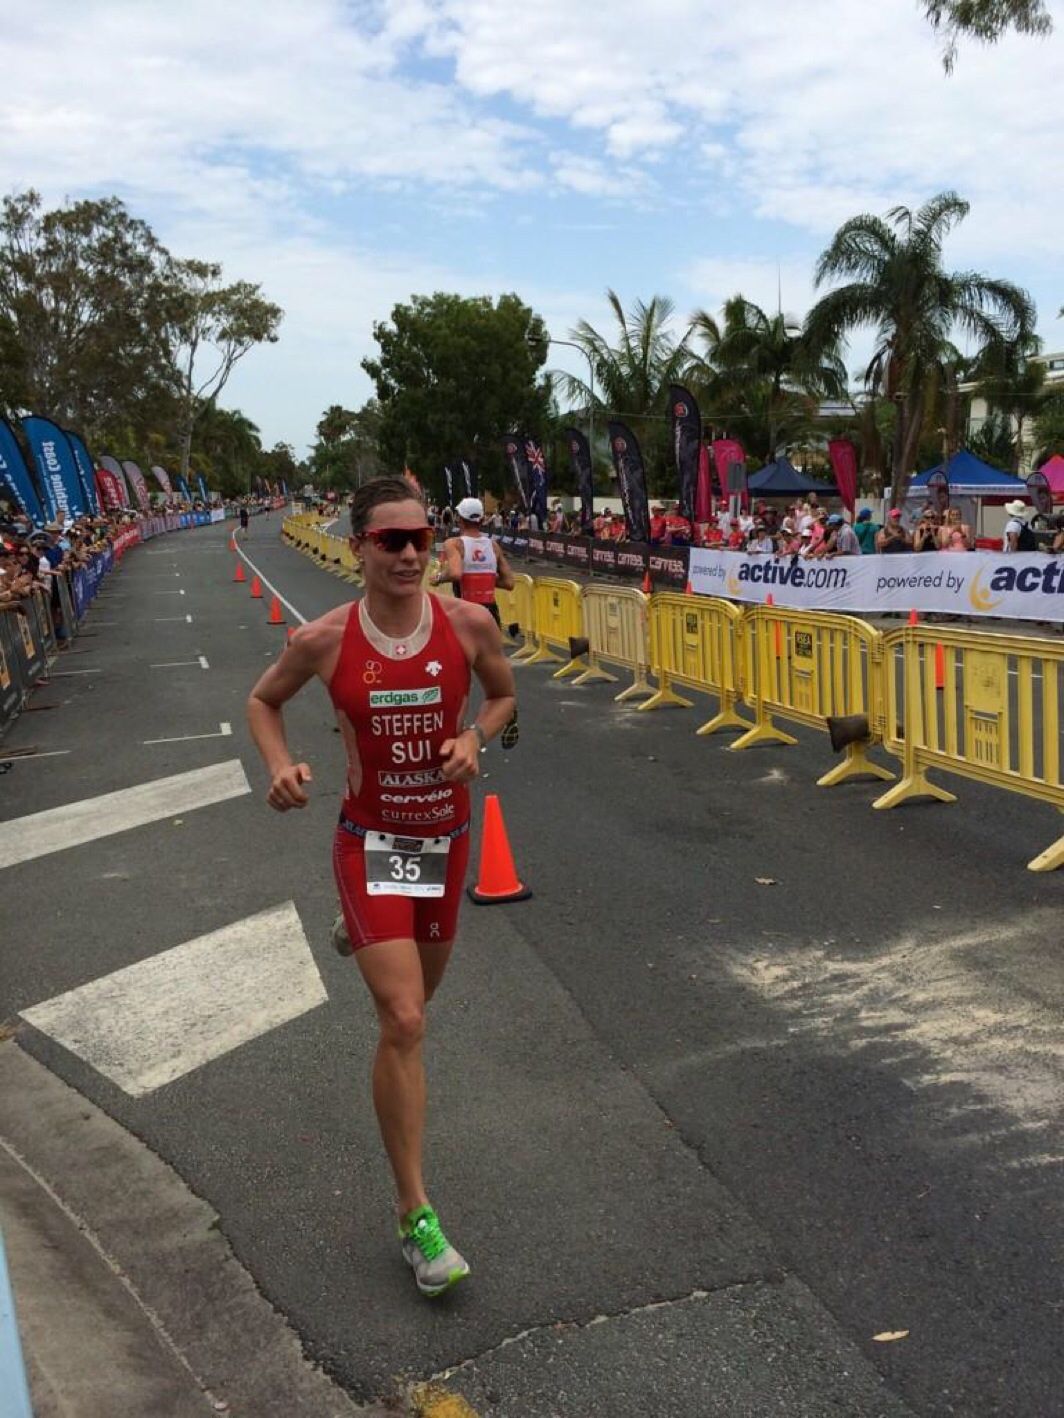 Caroline Steffen raced impressively against the ITU stars today in Noosa to finish 3rd